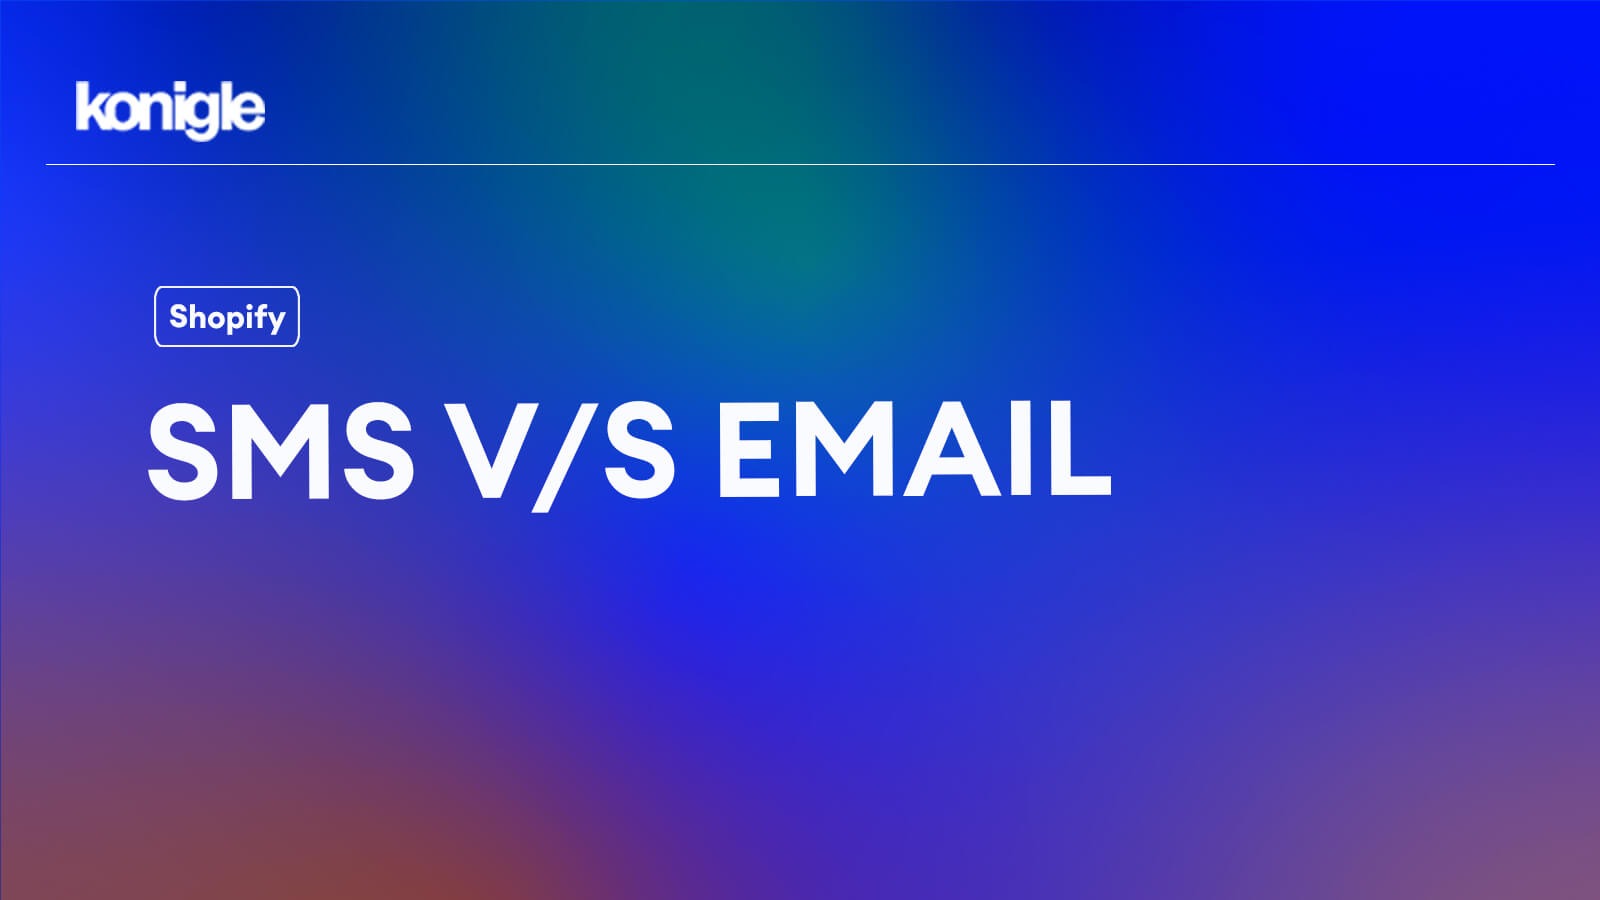 Sms marketing vs Email marketing: Which is more effective?